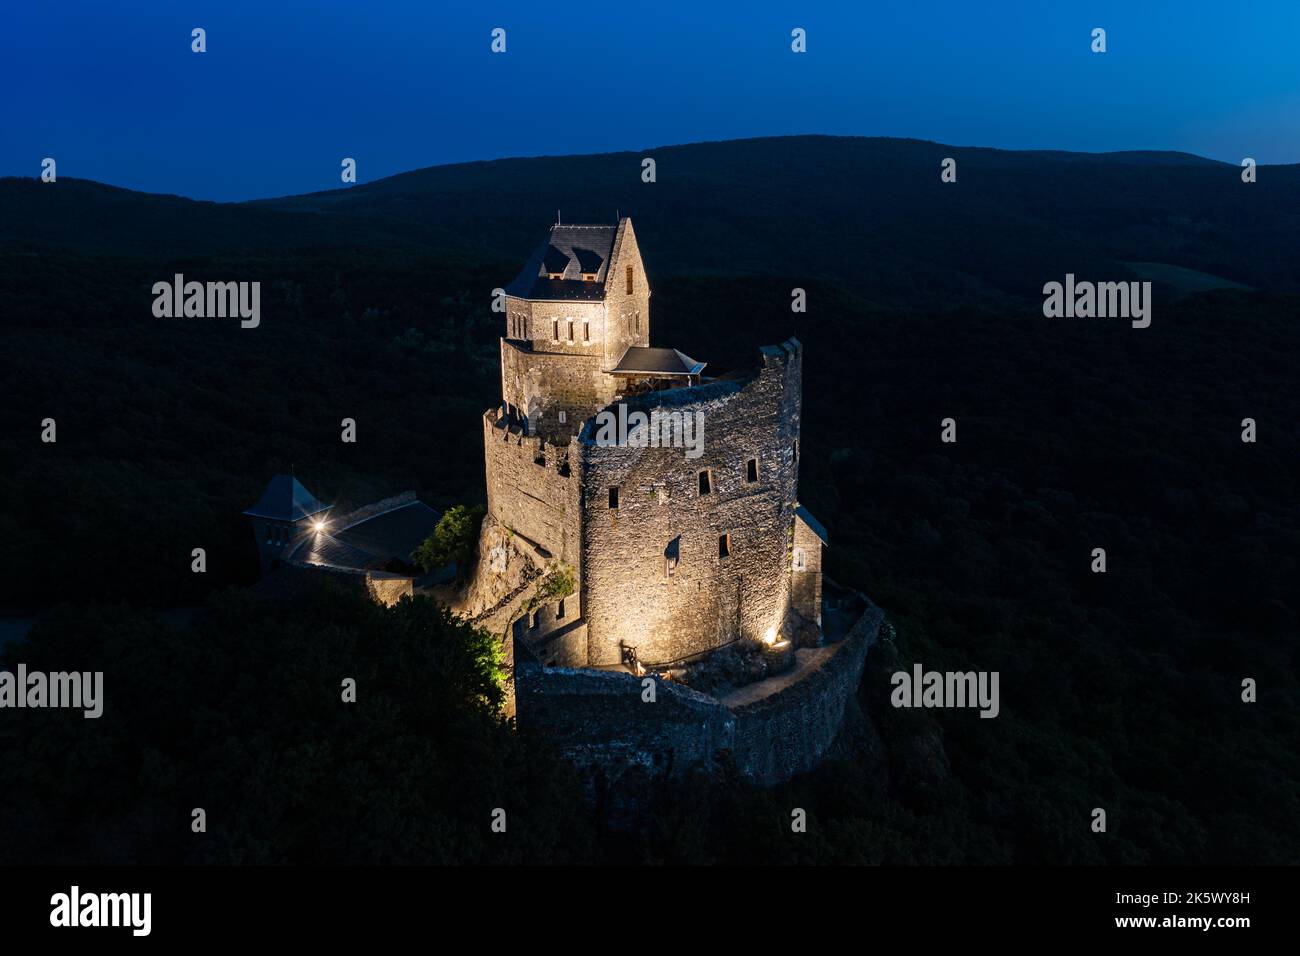 Renewed historical monument in Hungary Mountains. Aerial landscape photo about a medieval castle ruins near by Holloko town. Panoramic landscape photo Stock Photo